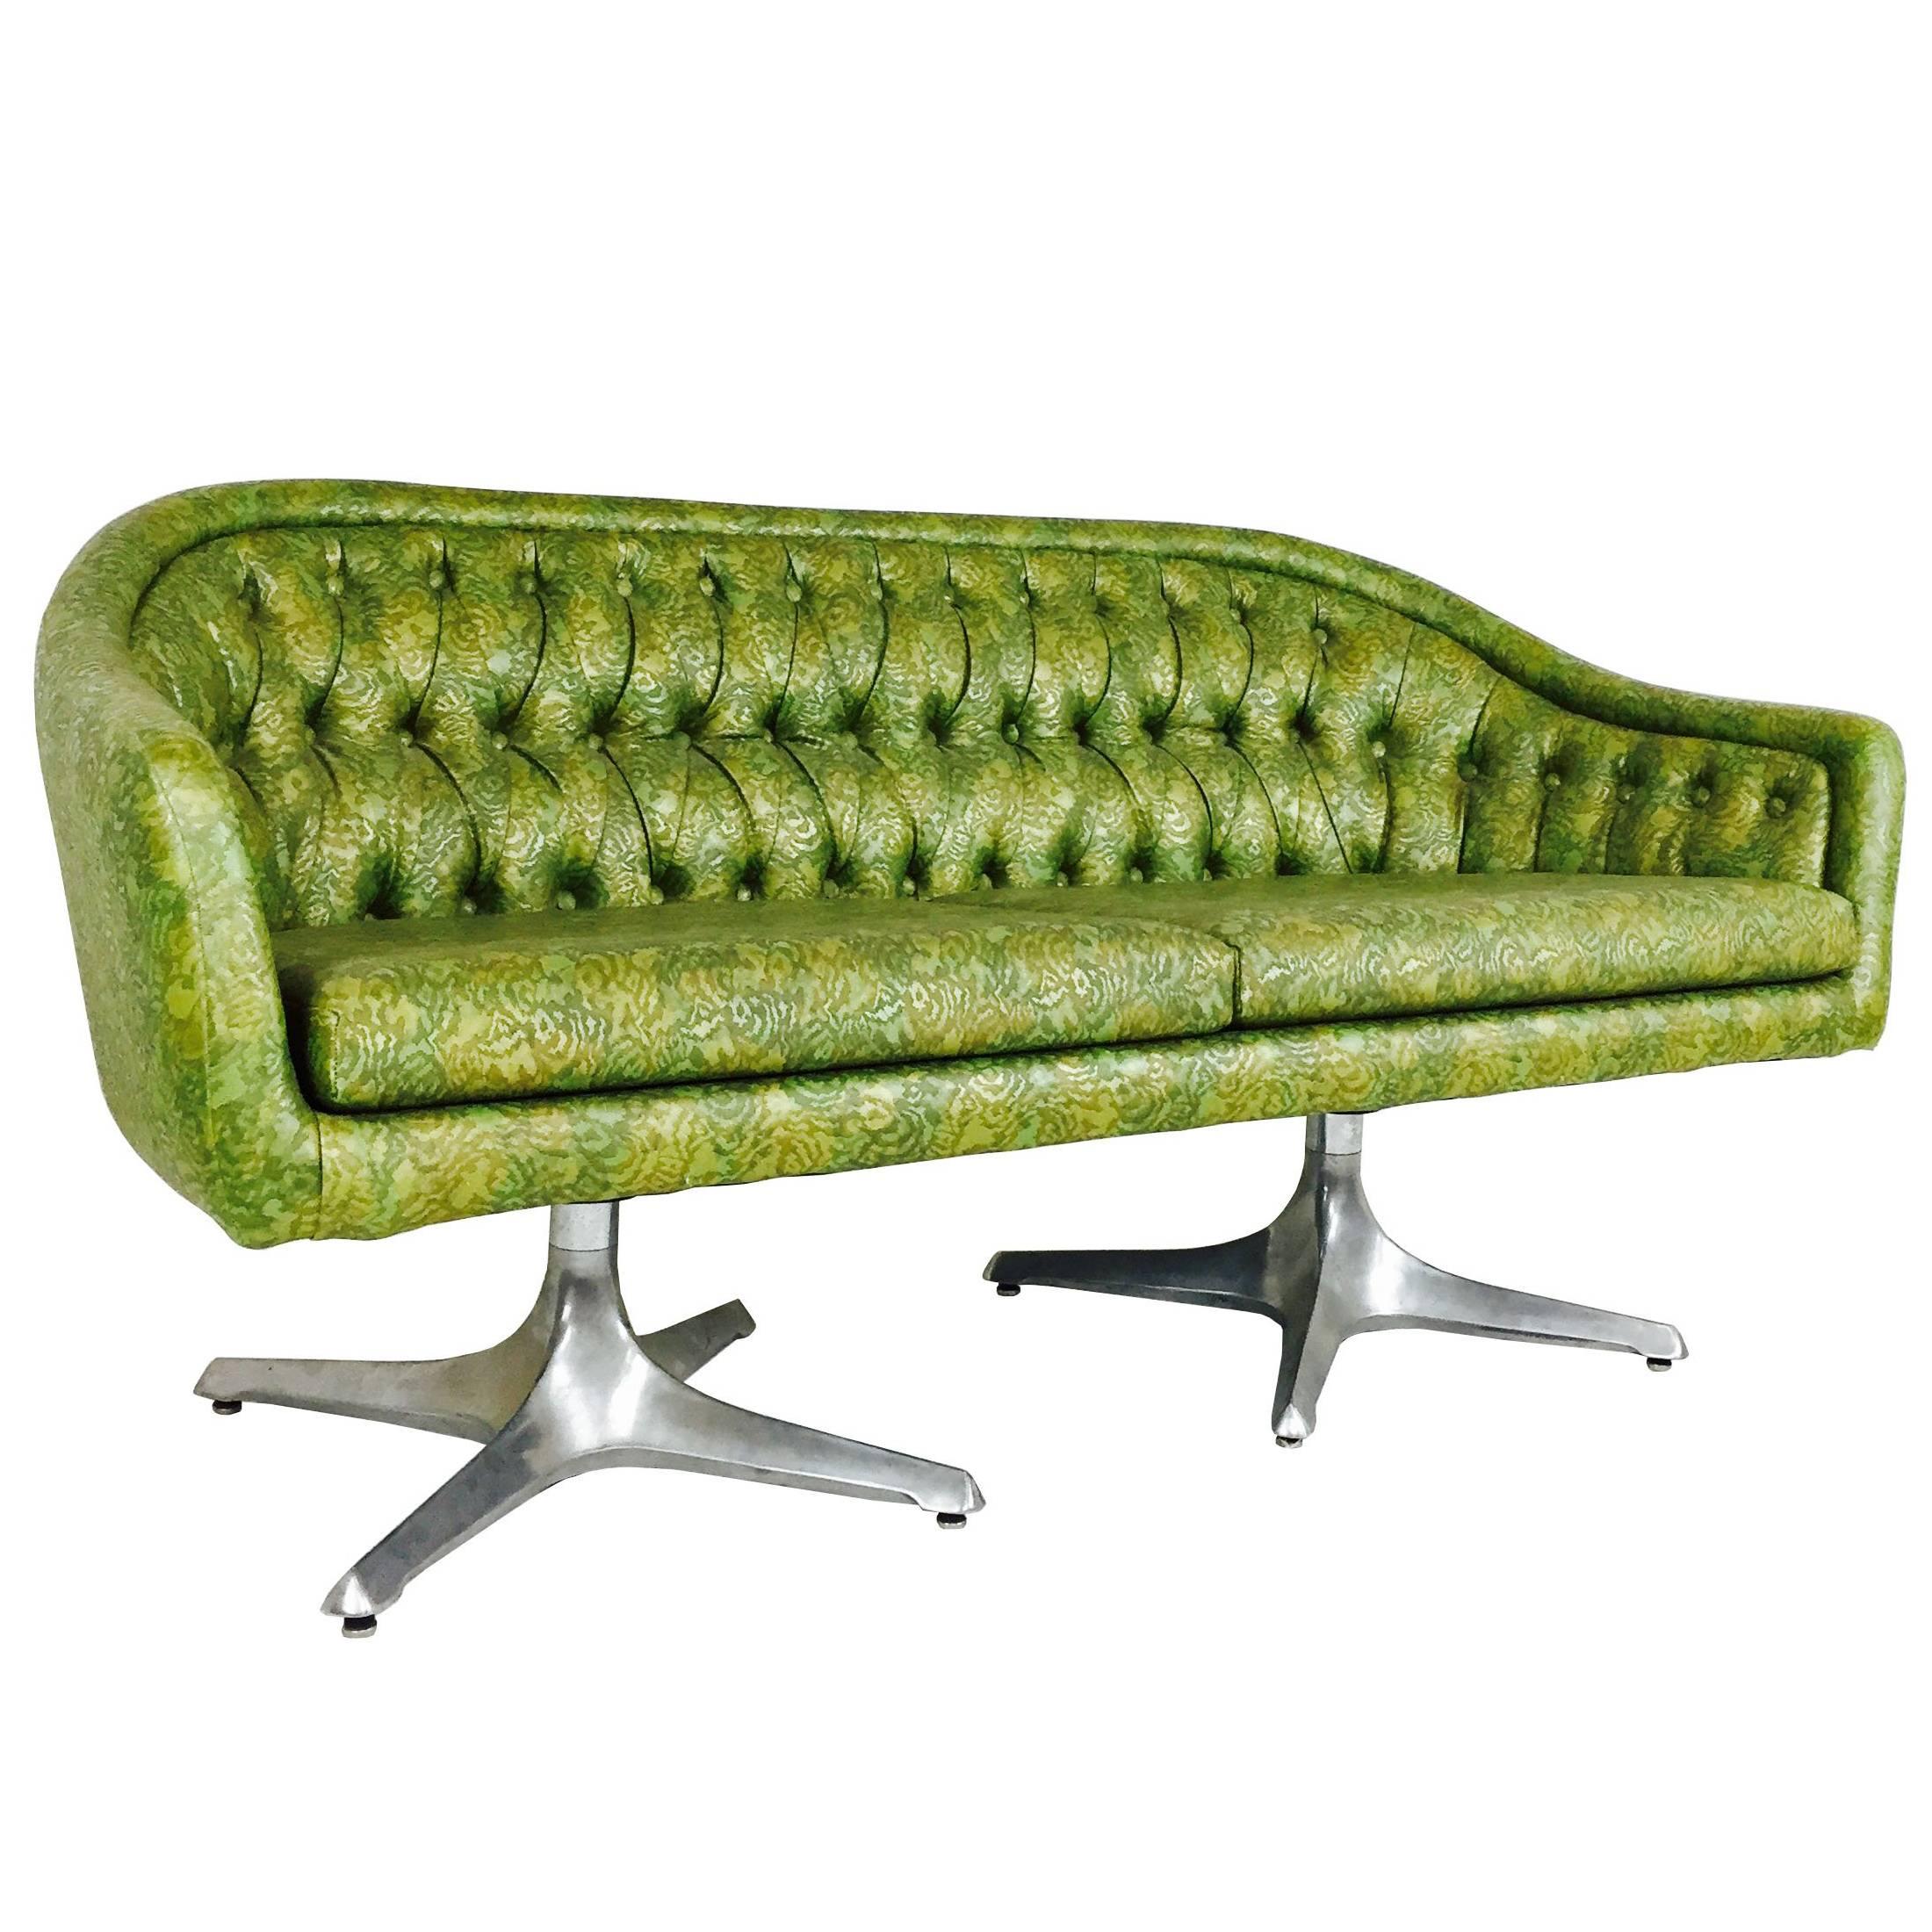 Groovy Double Pedestal Tufted Loveseat by Chromcraft